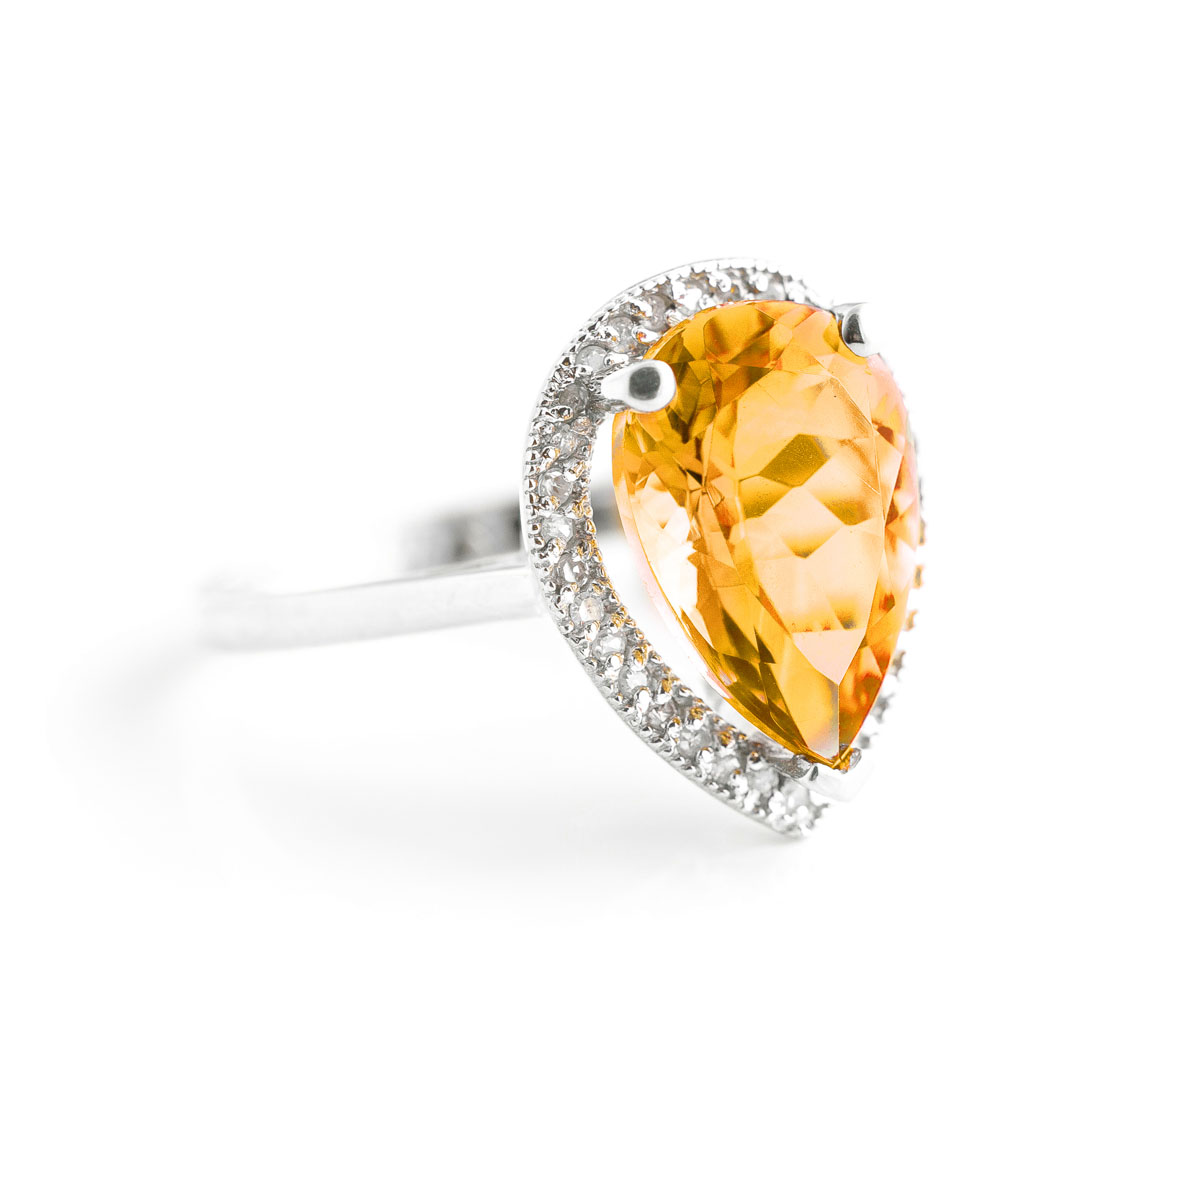 Citrine Halo Ring 3.41 ctw in 18ct White Gold